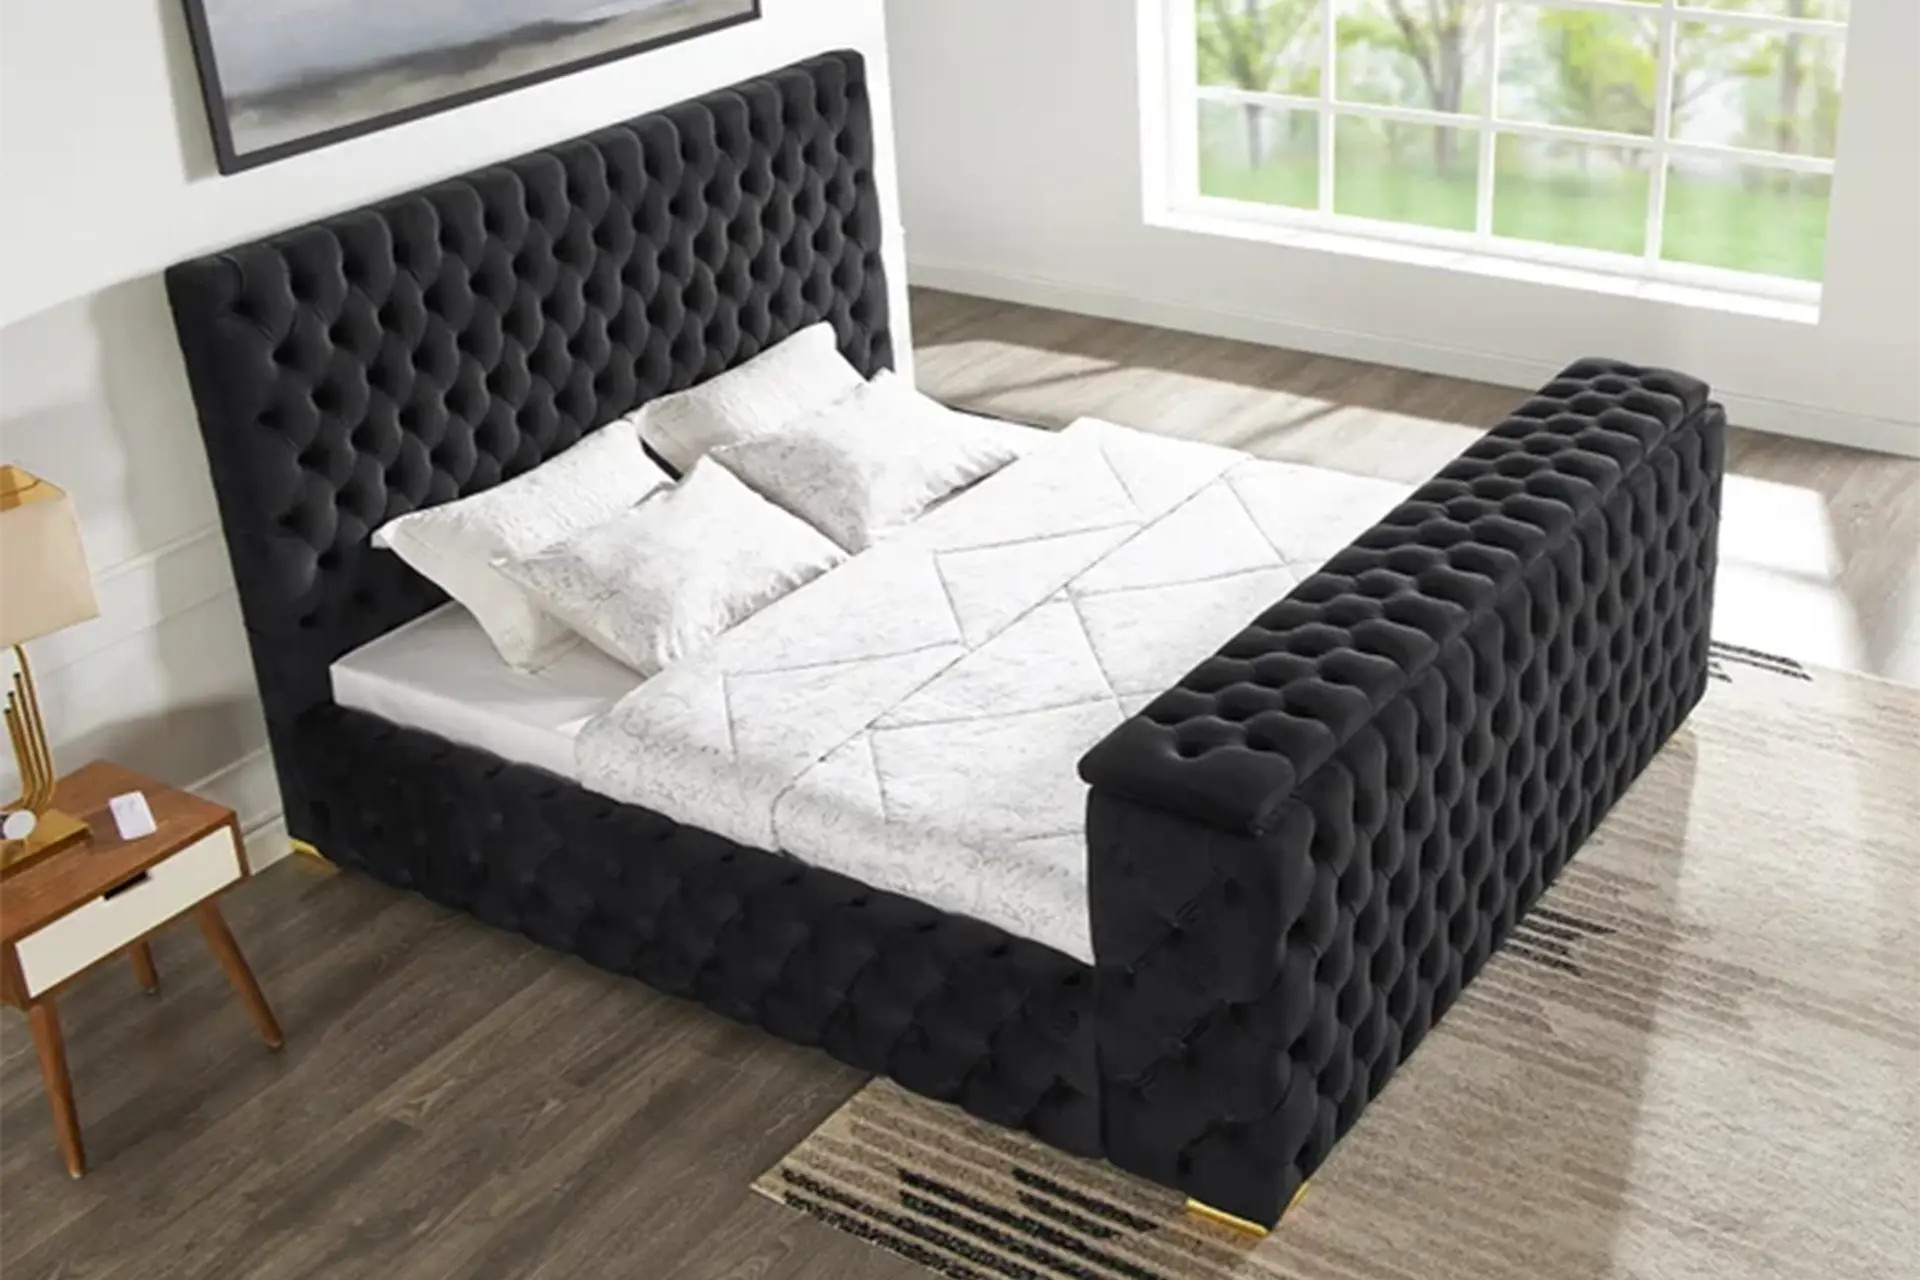 Black Velvet Fireplace Bed with bluetooth speakers.